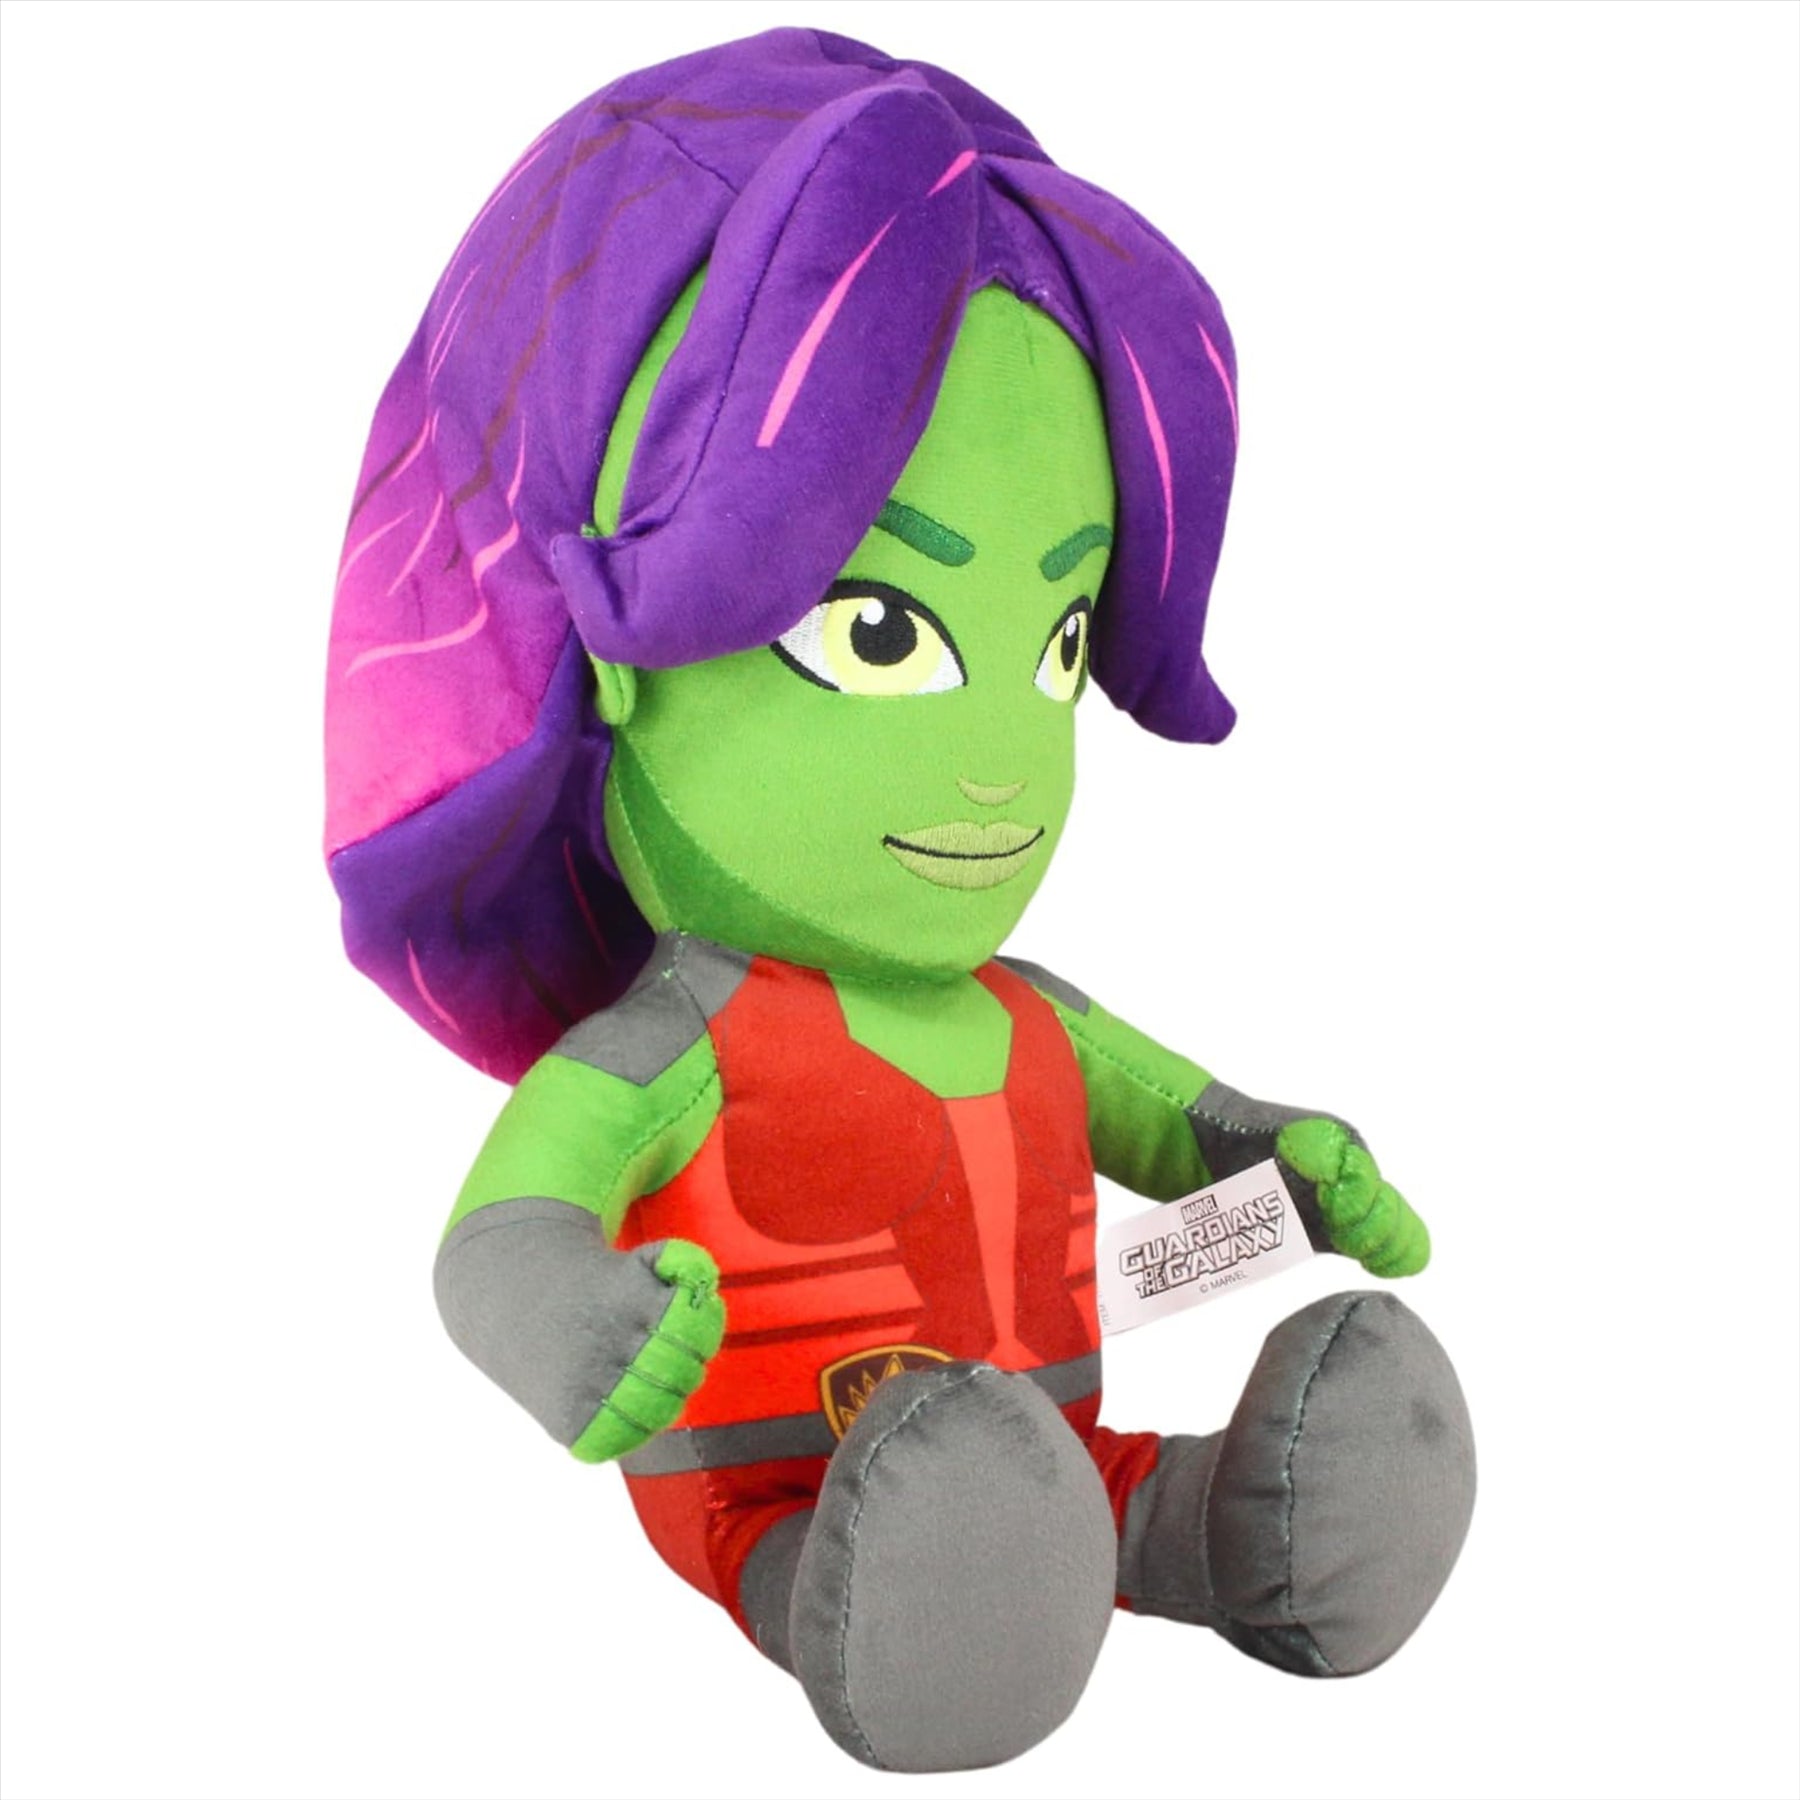 Guardians of the Galaxy Avengers Gamora Super Soft Embroidered 36cm Plush Toy - Toptoys2u